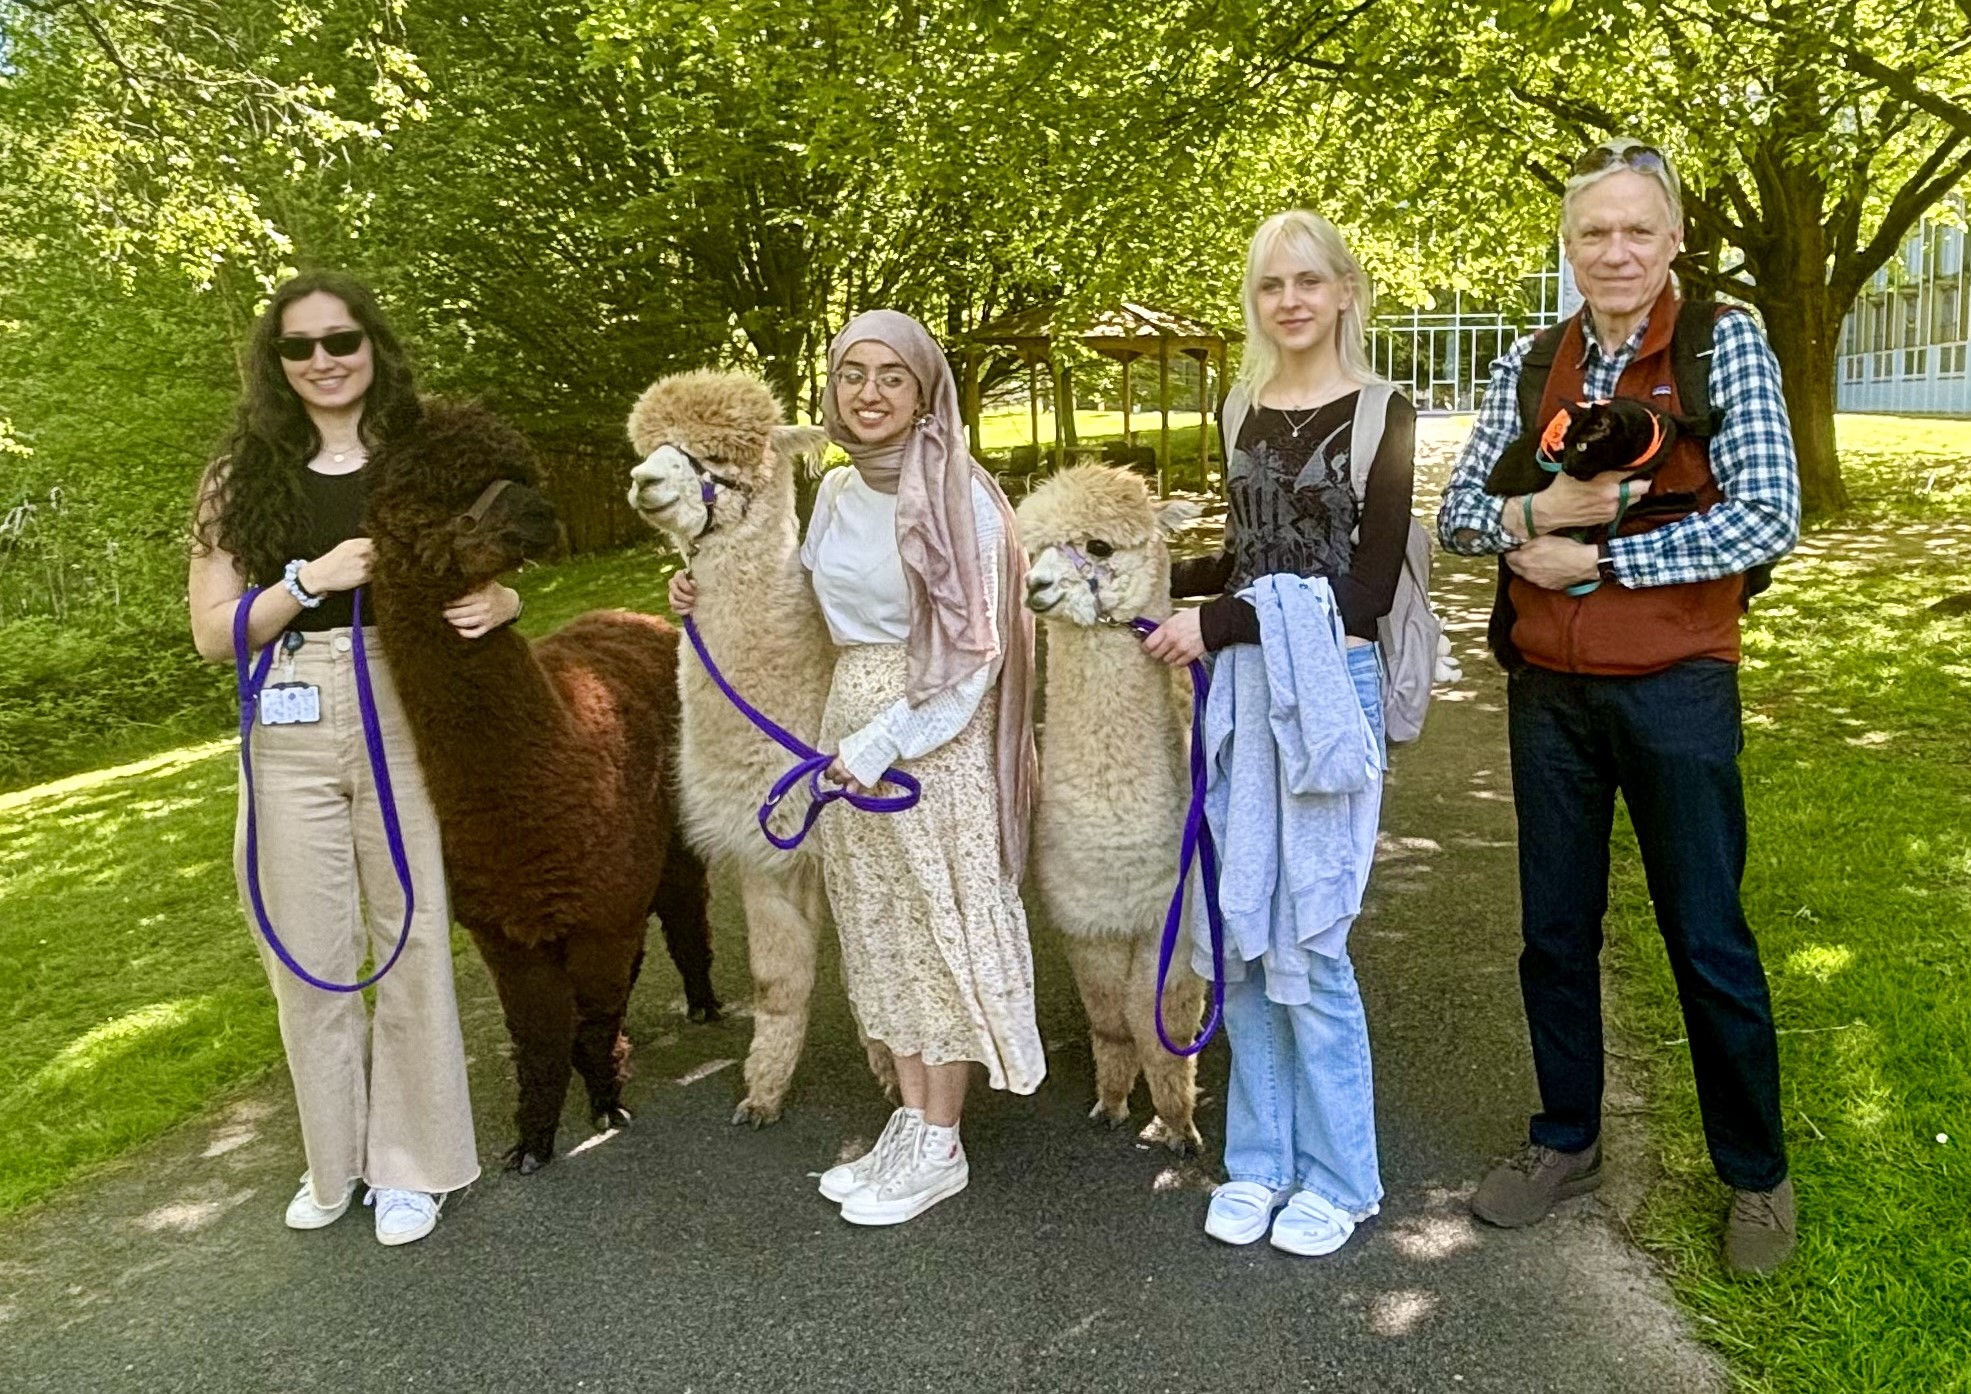 Images of alpacas and Rolf the campus cat